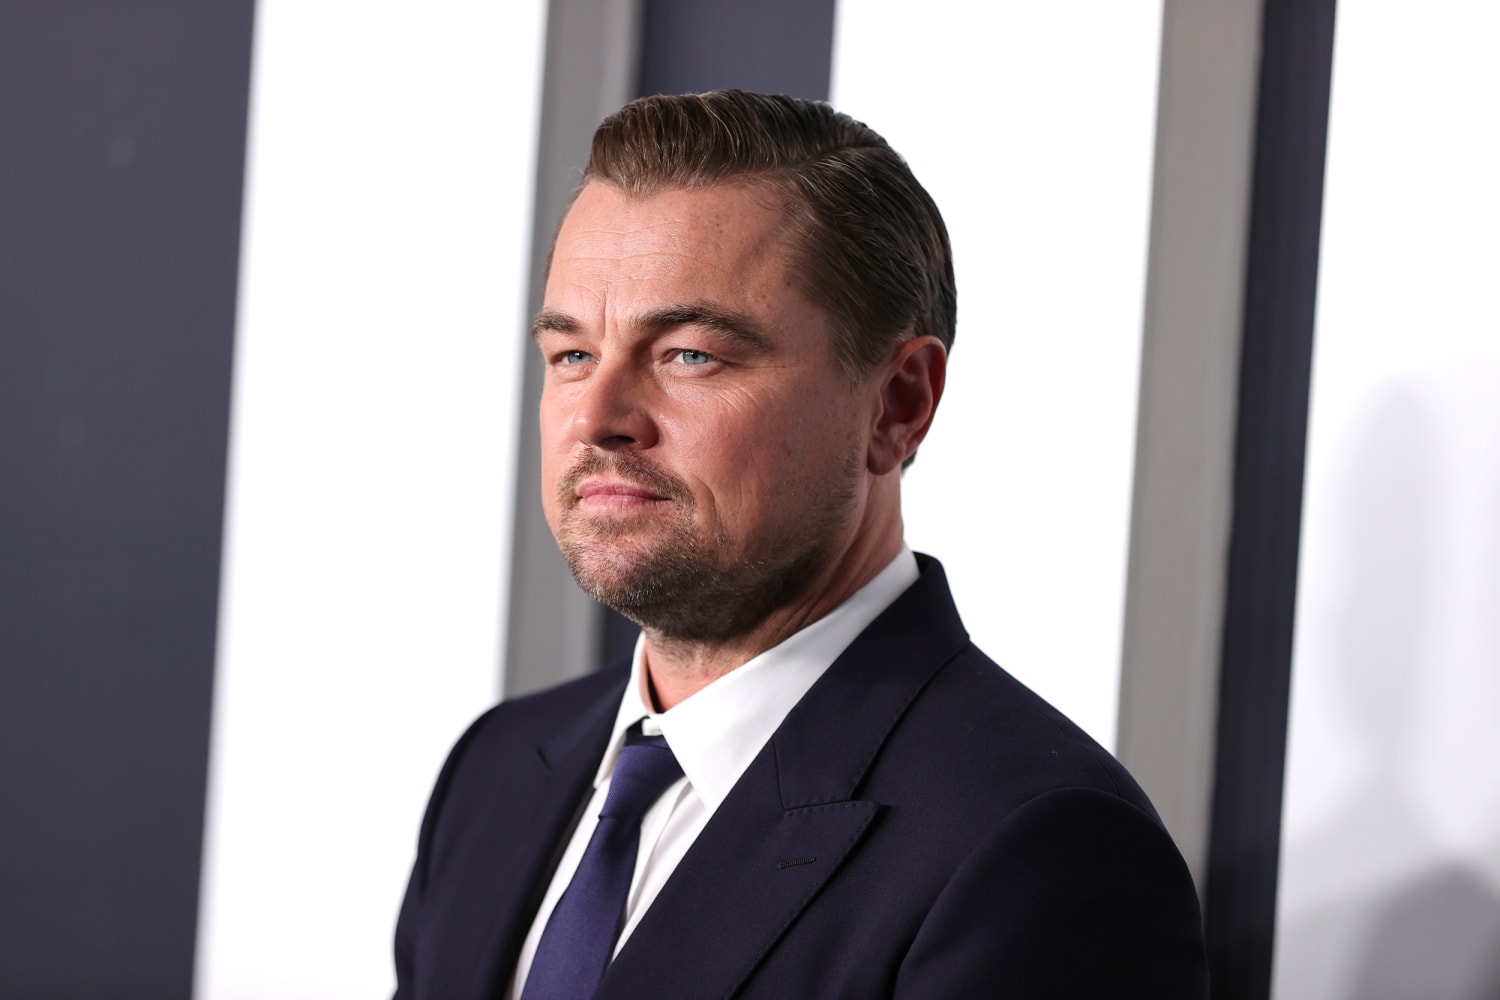 A new tree species is named after Leonardo DiCaprio